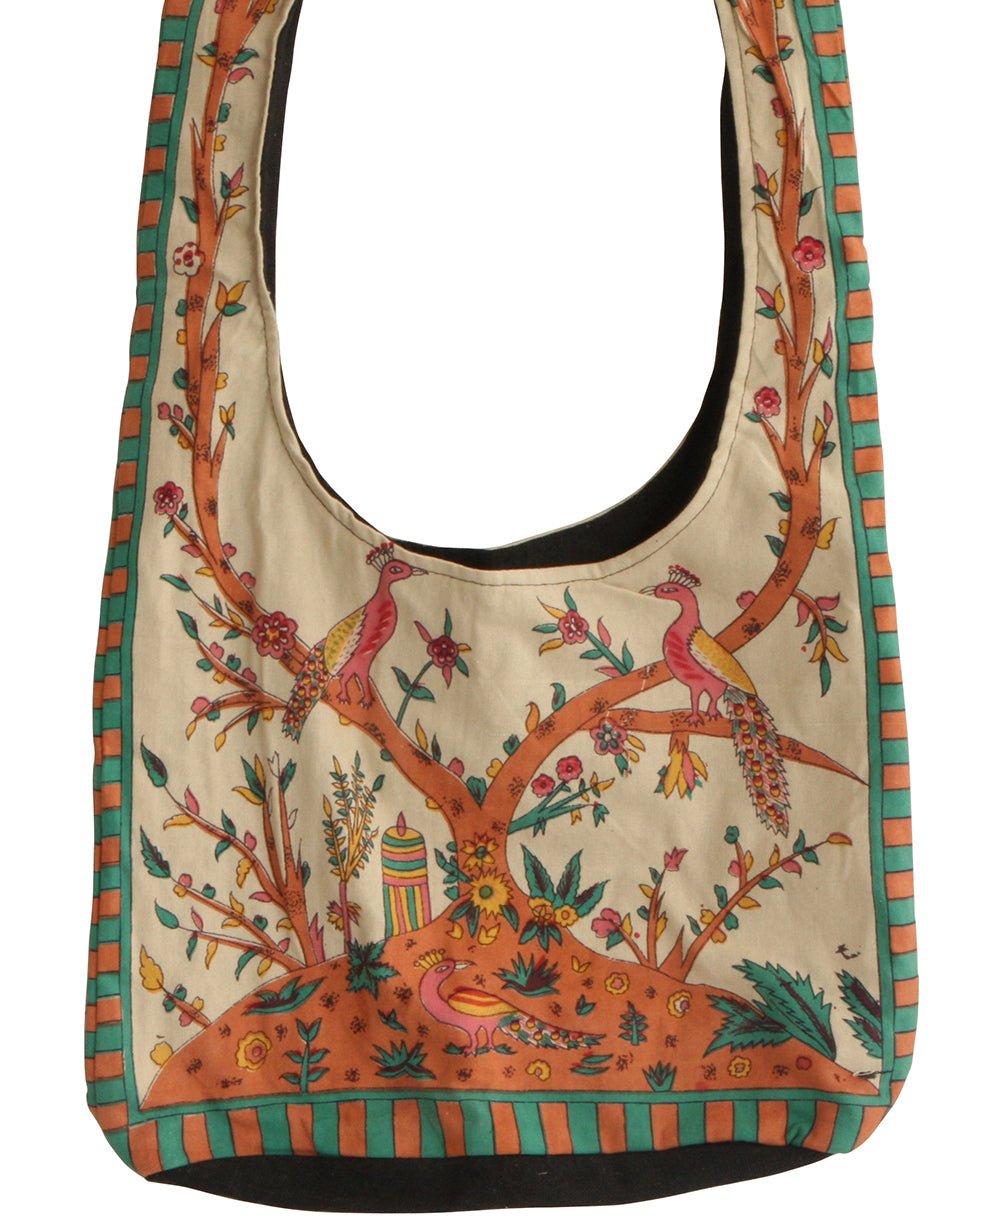 Tree of Life Messenger Bag in Beige and Green -